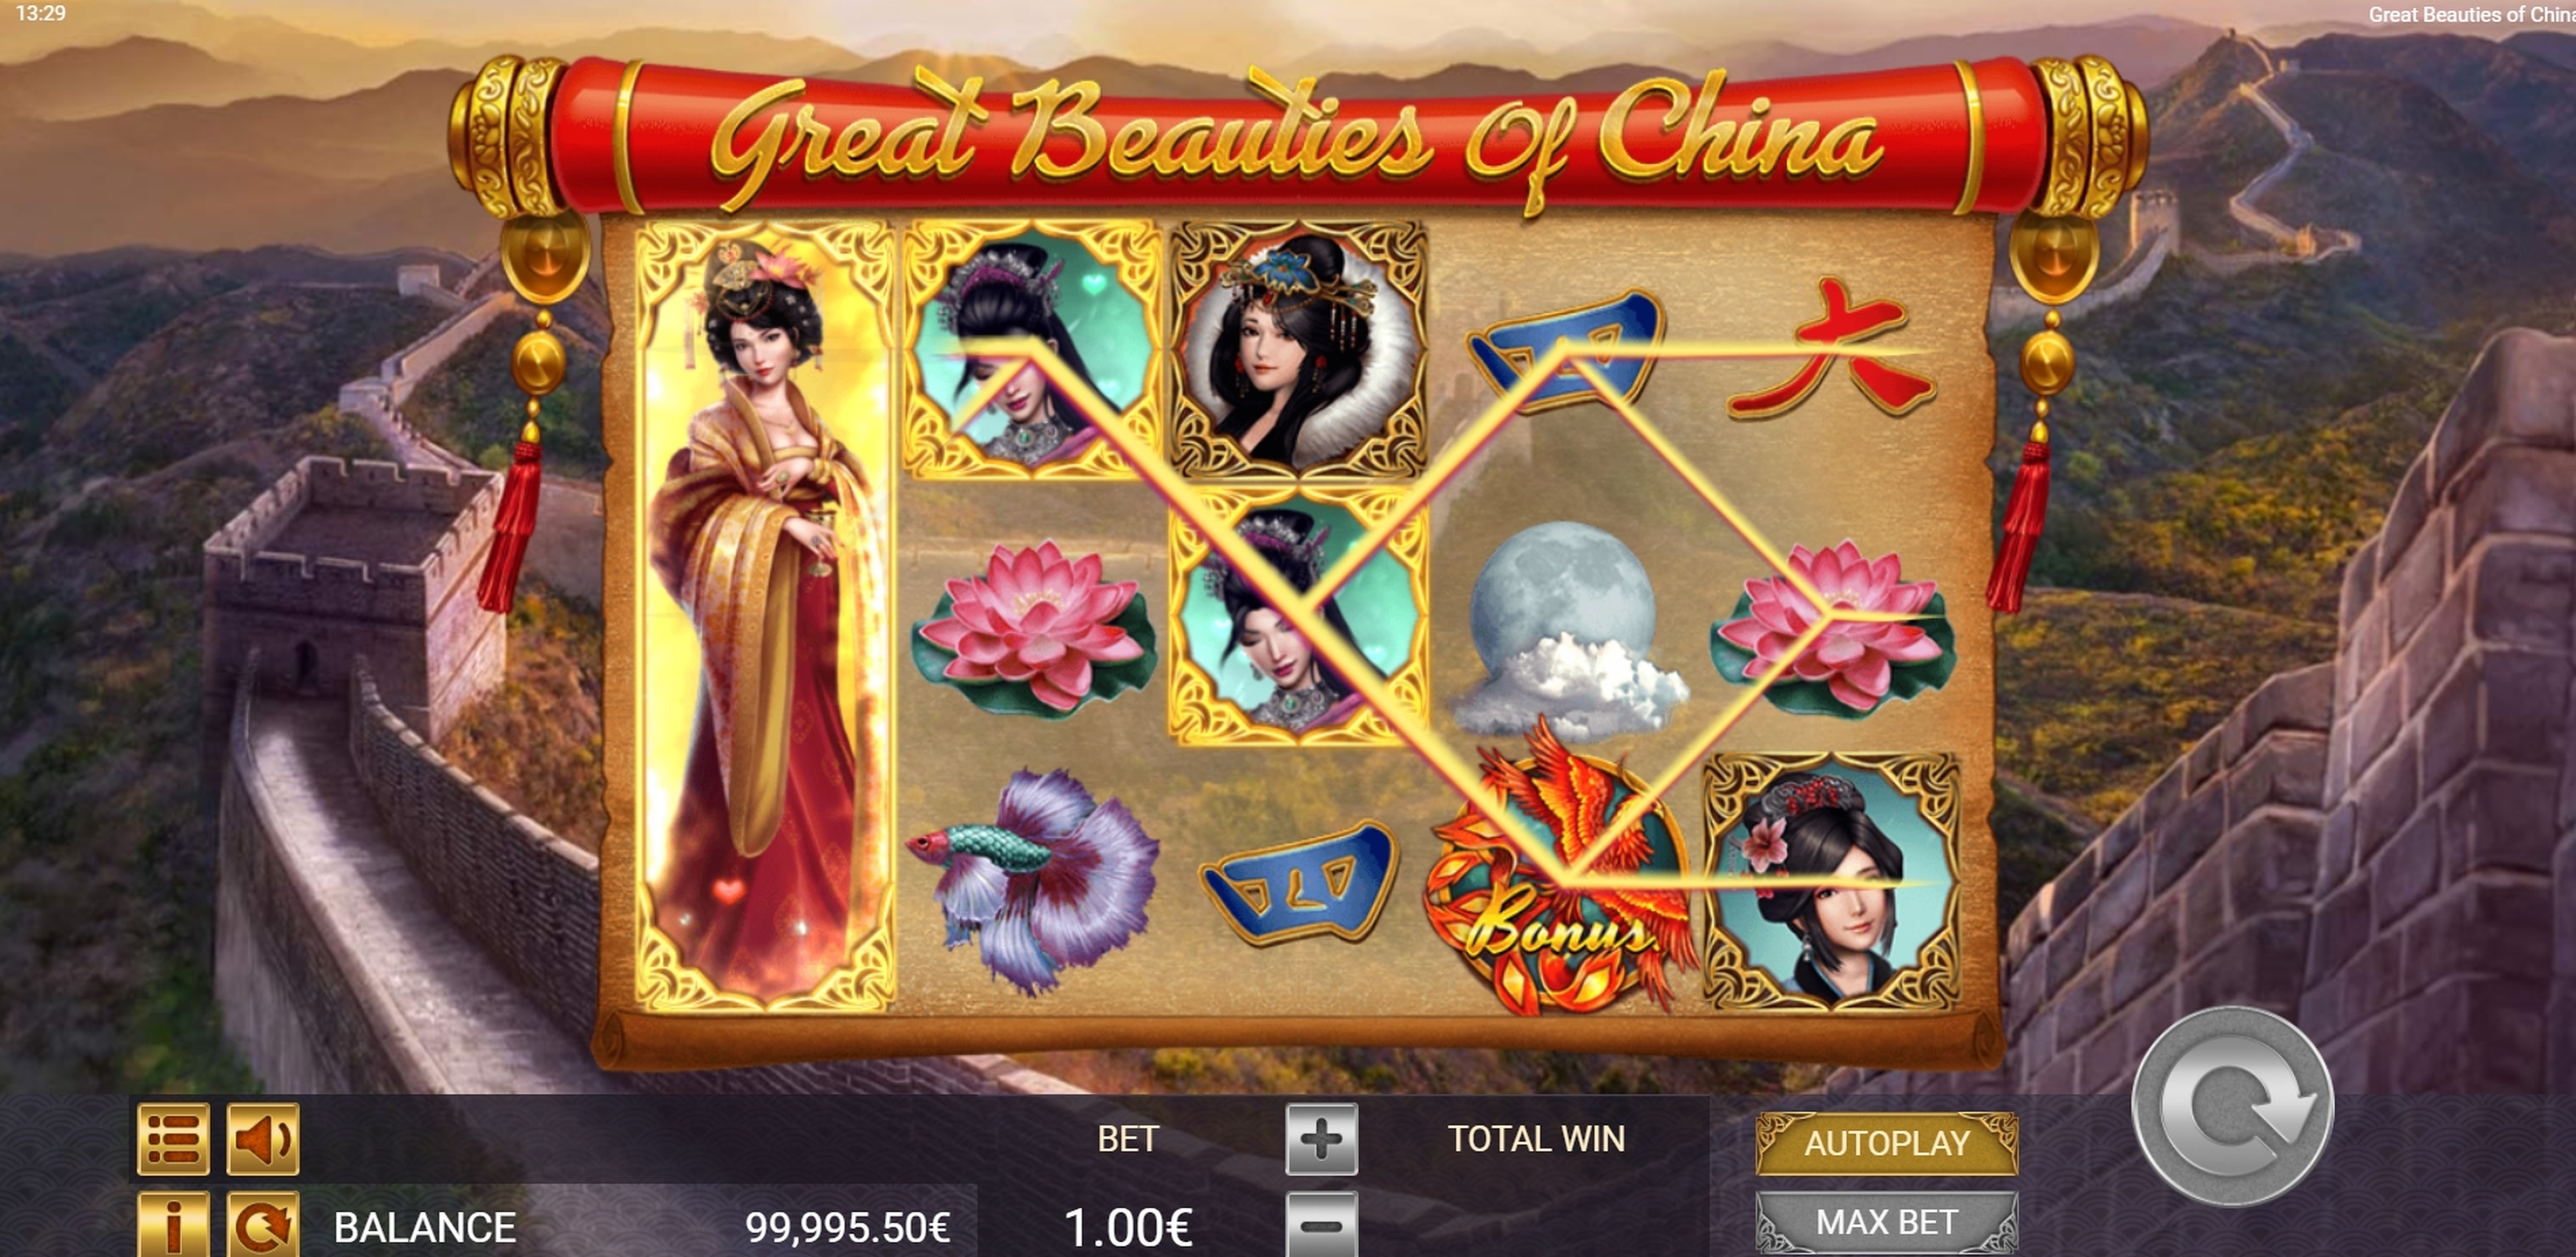 Win Money in Great Beautiies Of China Free Slot Game by Ganapati